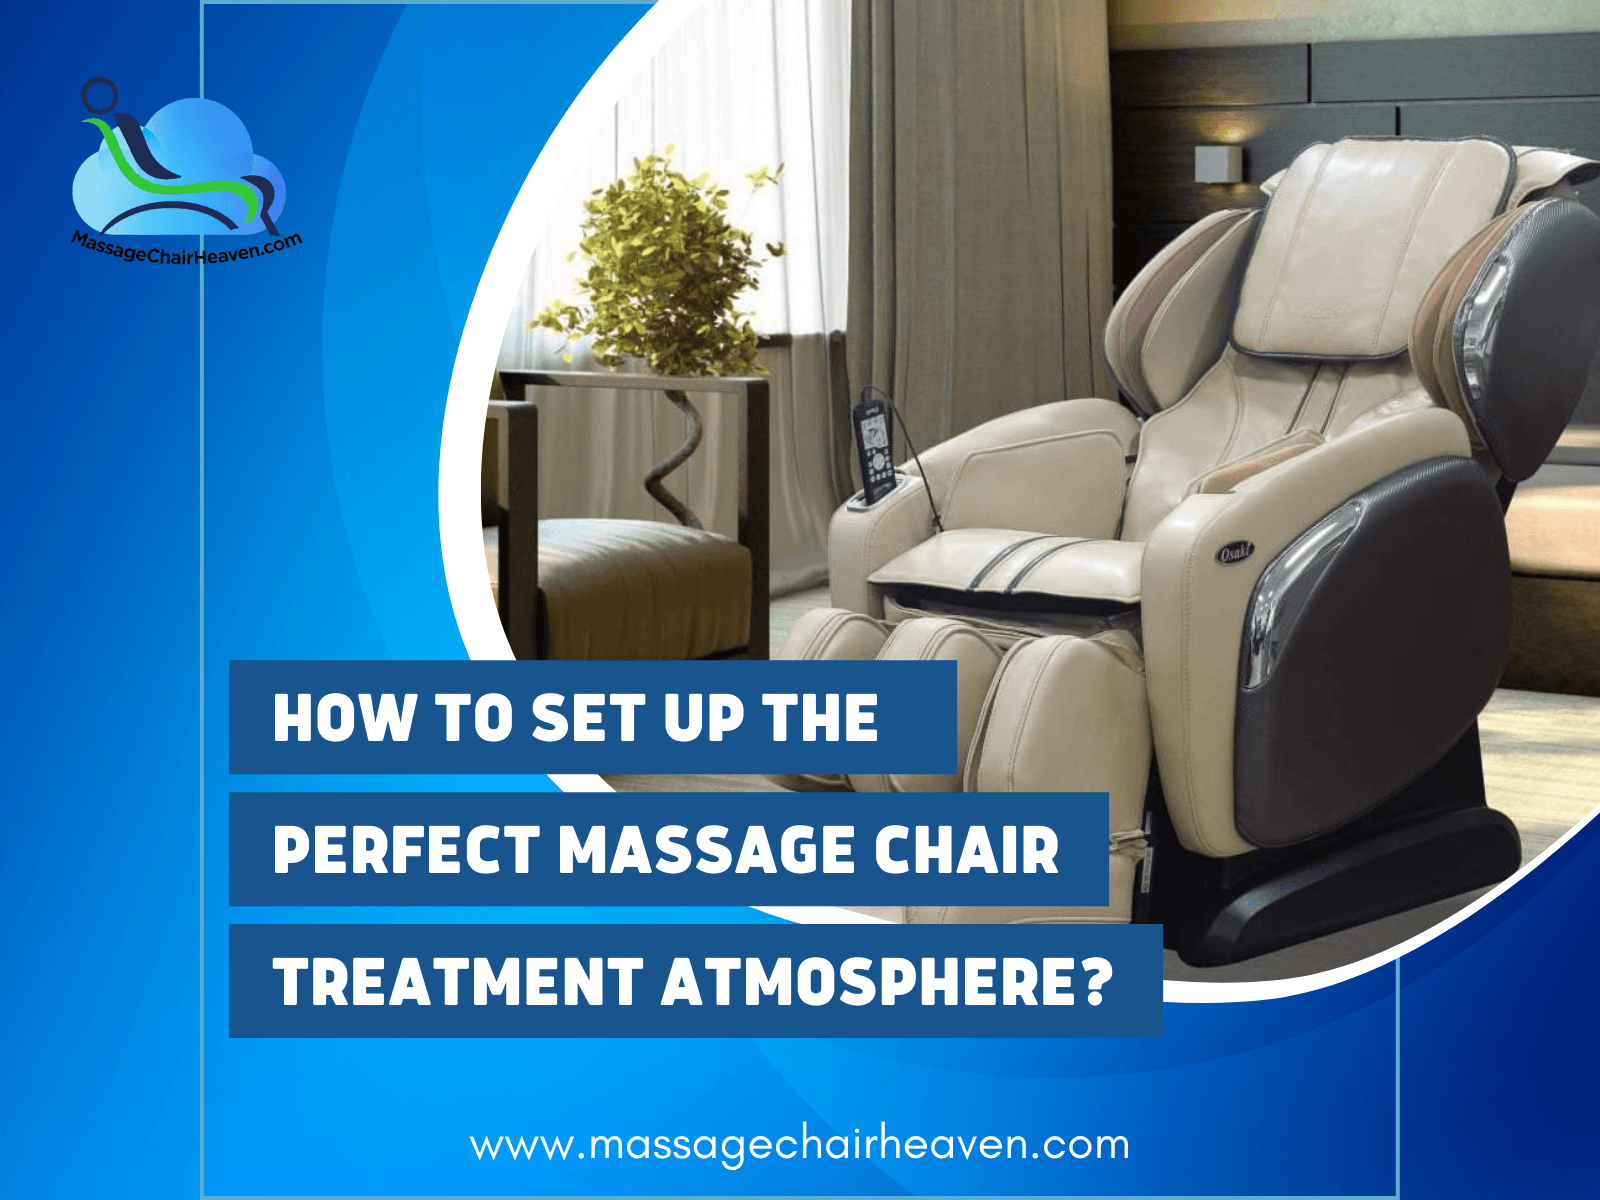 How To Set Up the Perfect Massage Chair Treatment Atmosphere - Massage Chair Heaven